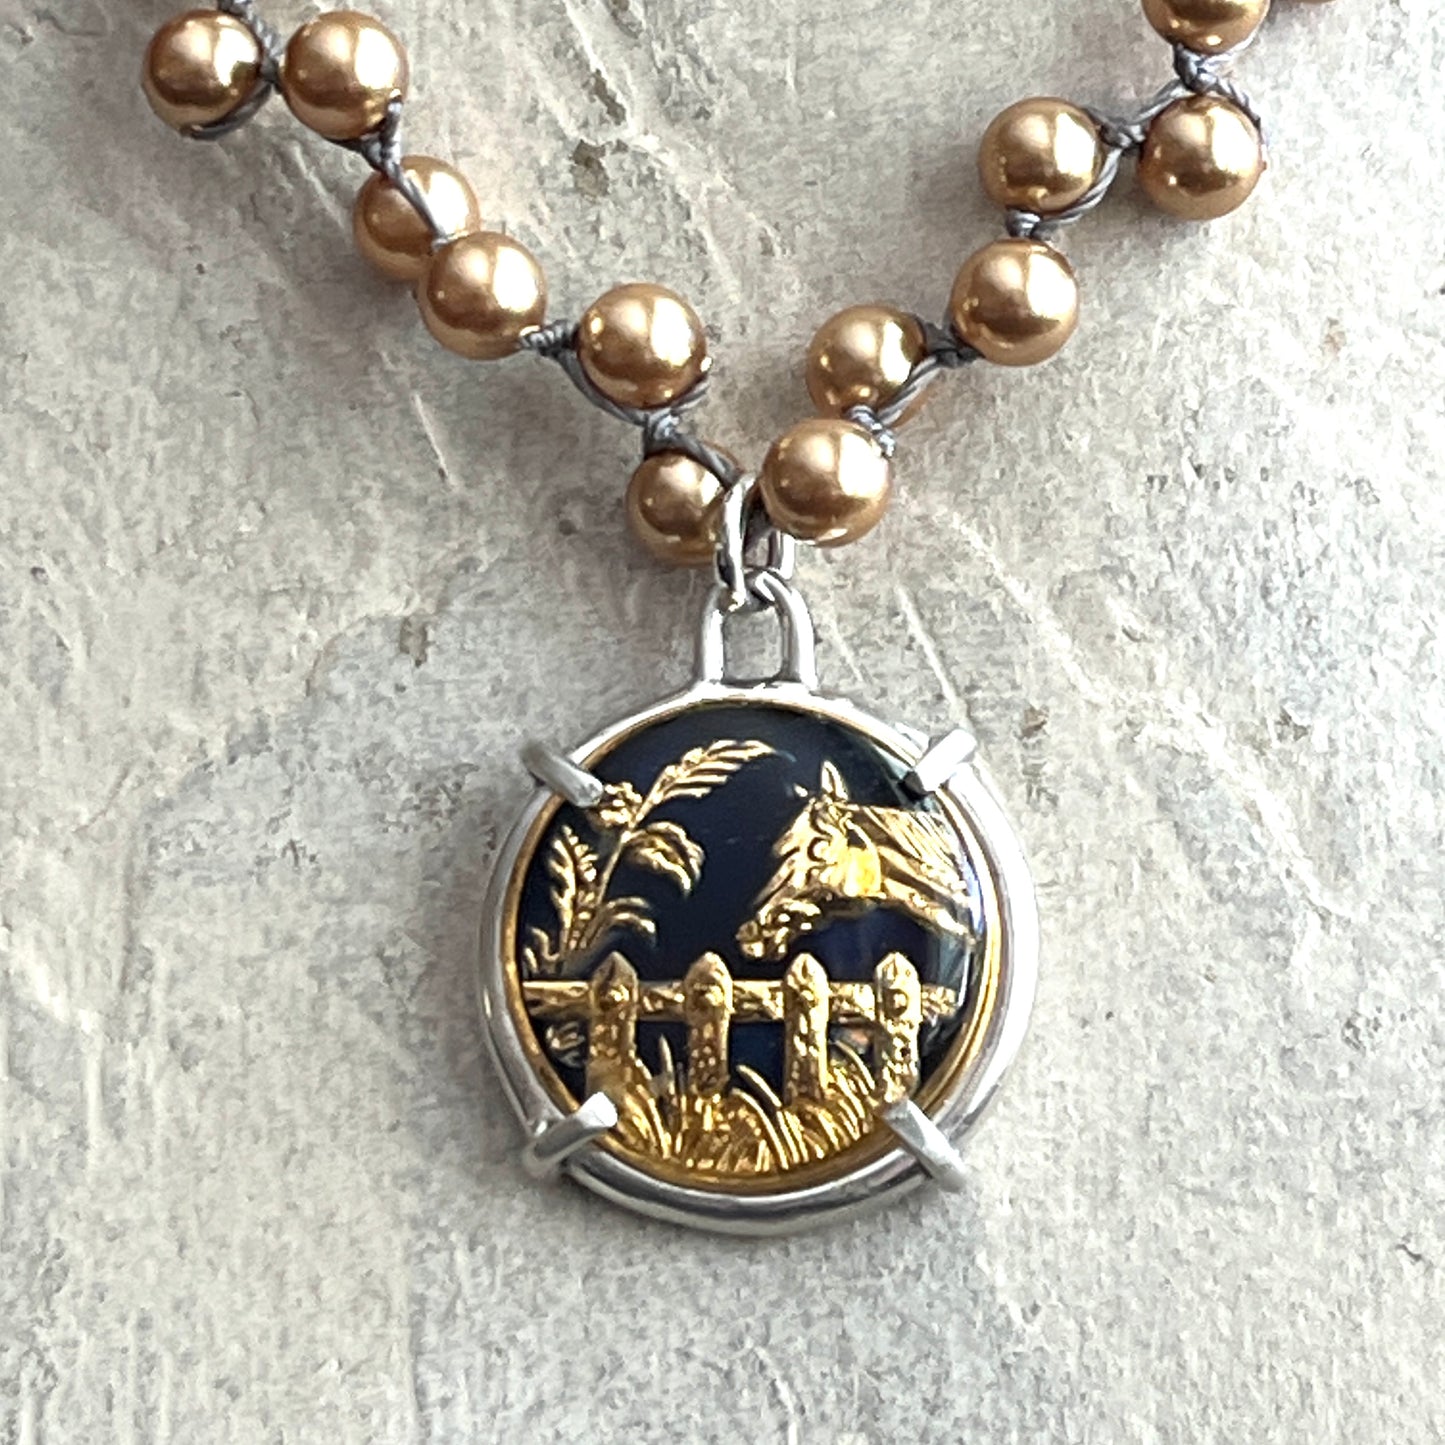 Gilt Enamel Horse Button on Pearl Necklace